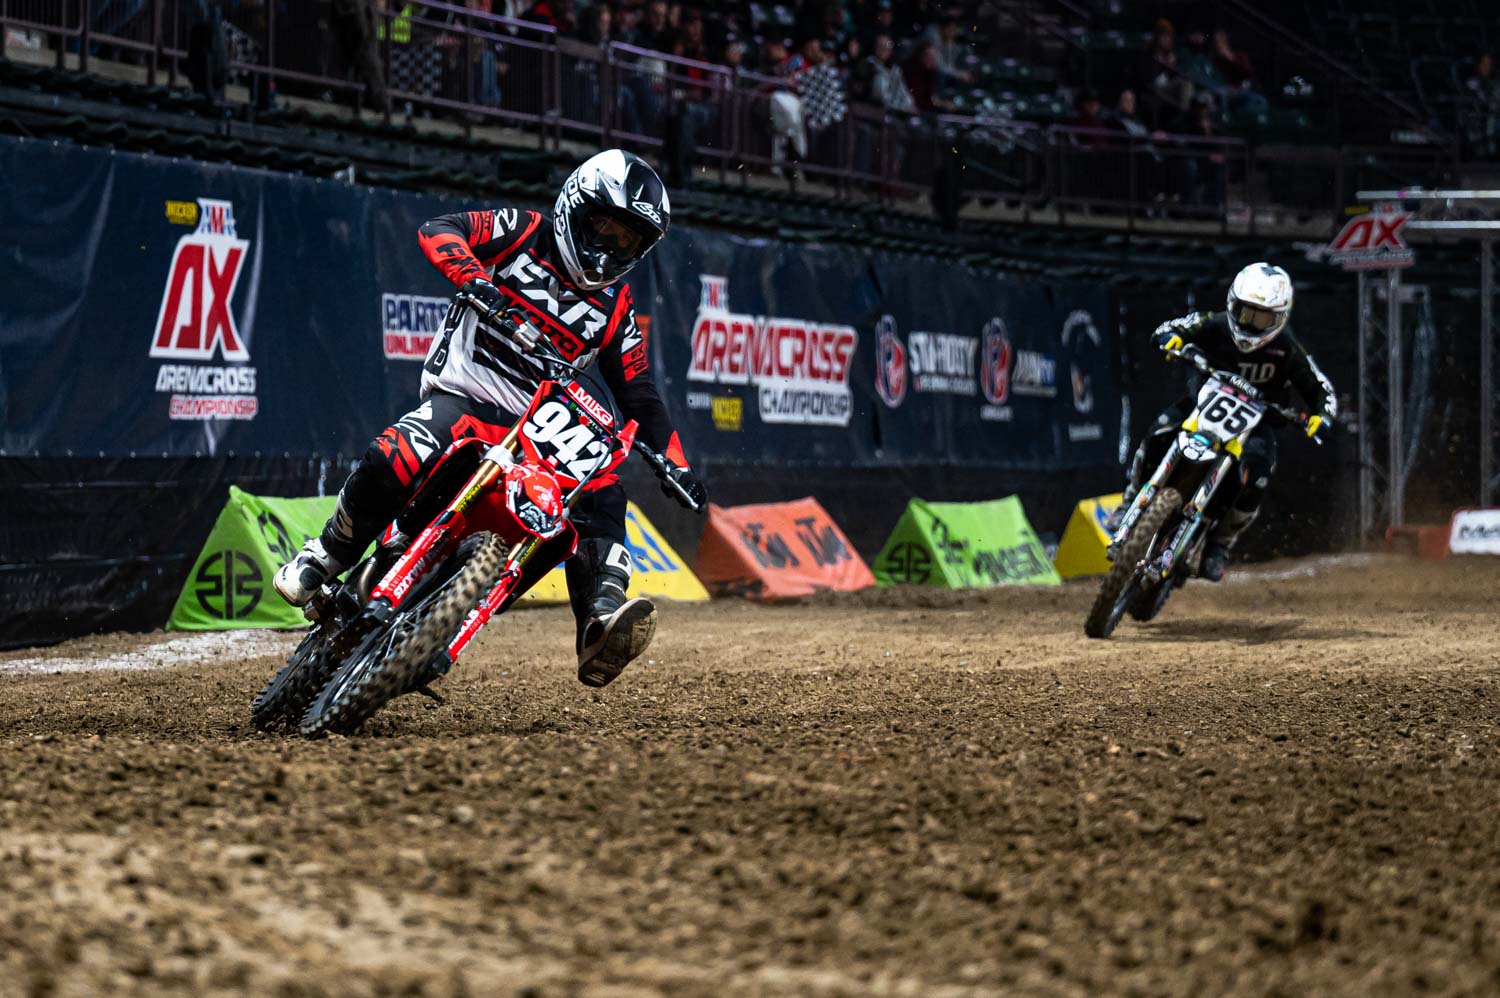 The+Thirst+for+First%3A+American+Motorcycle+Association+Arenacross+Championship+2023